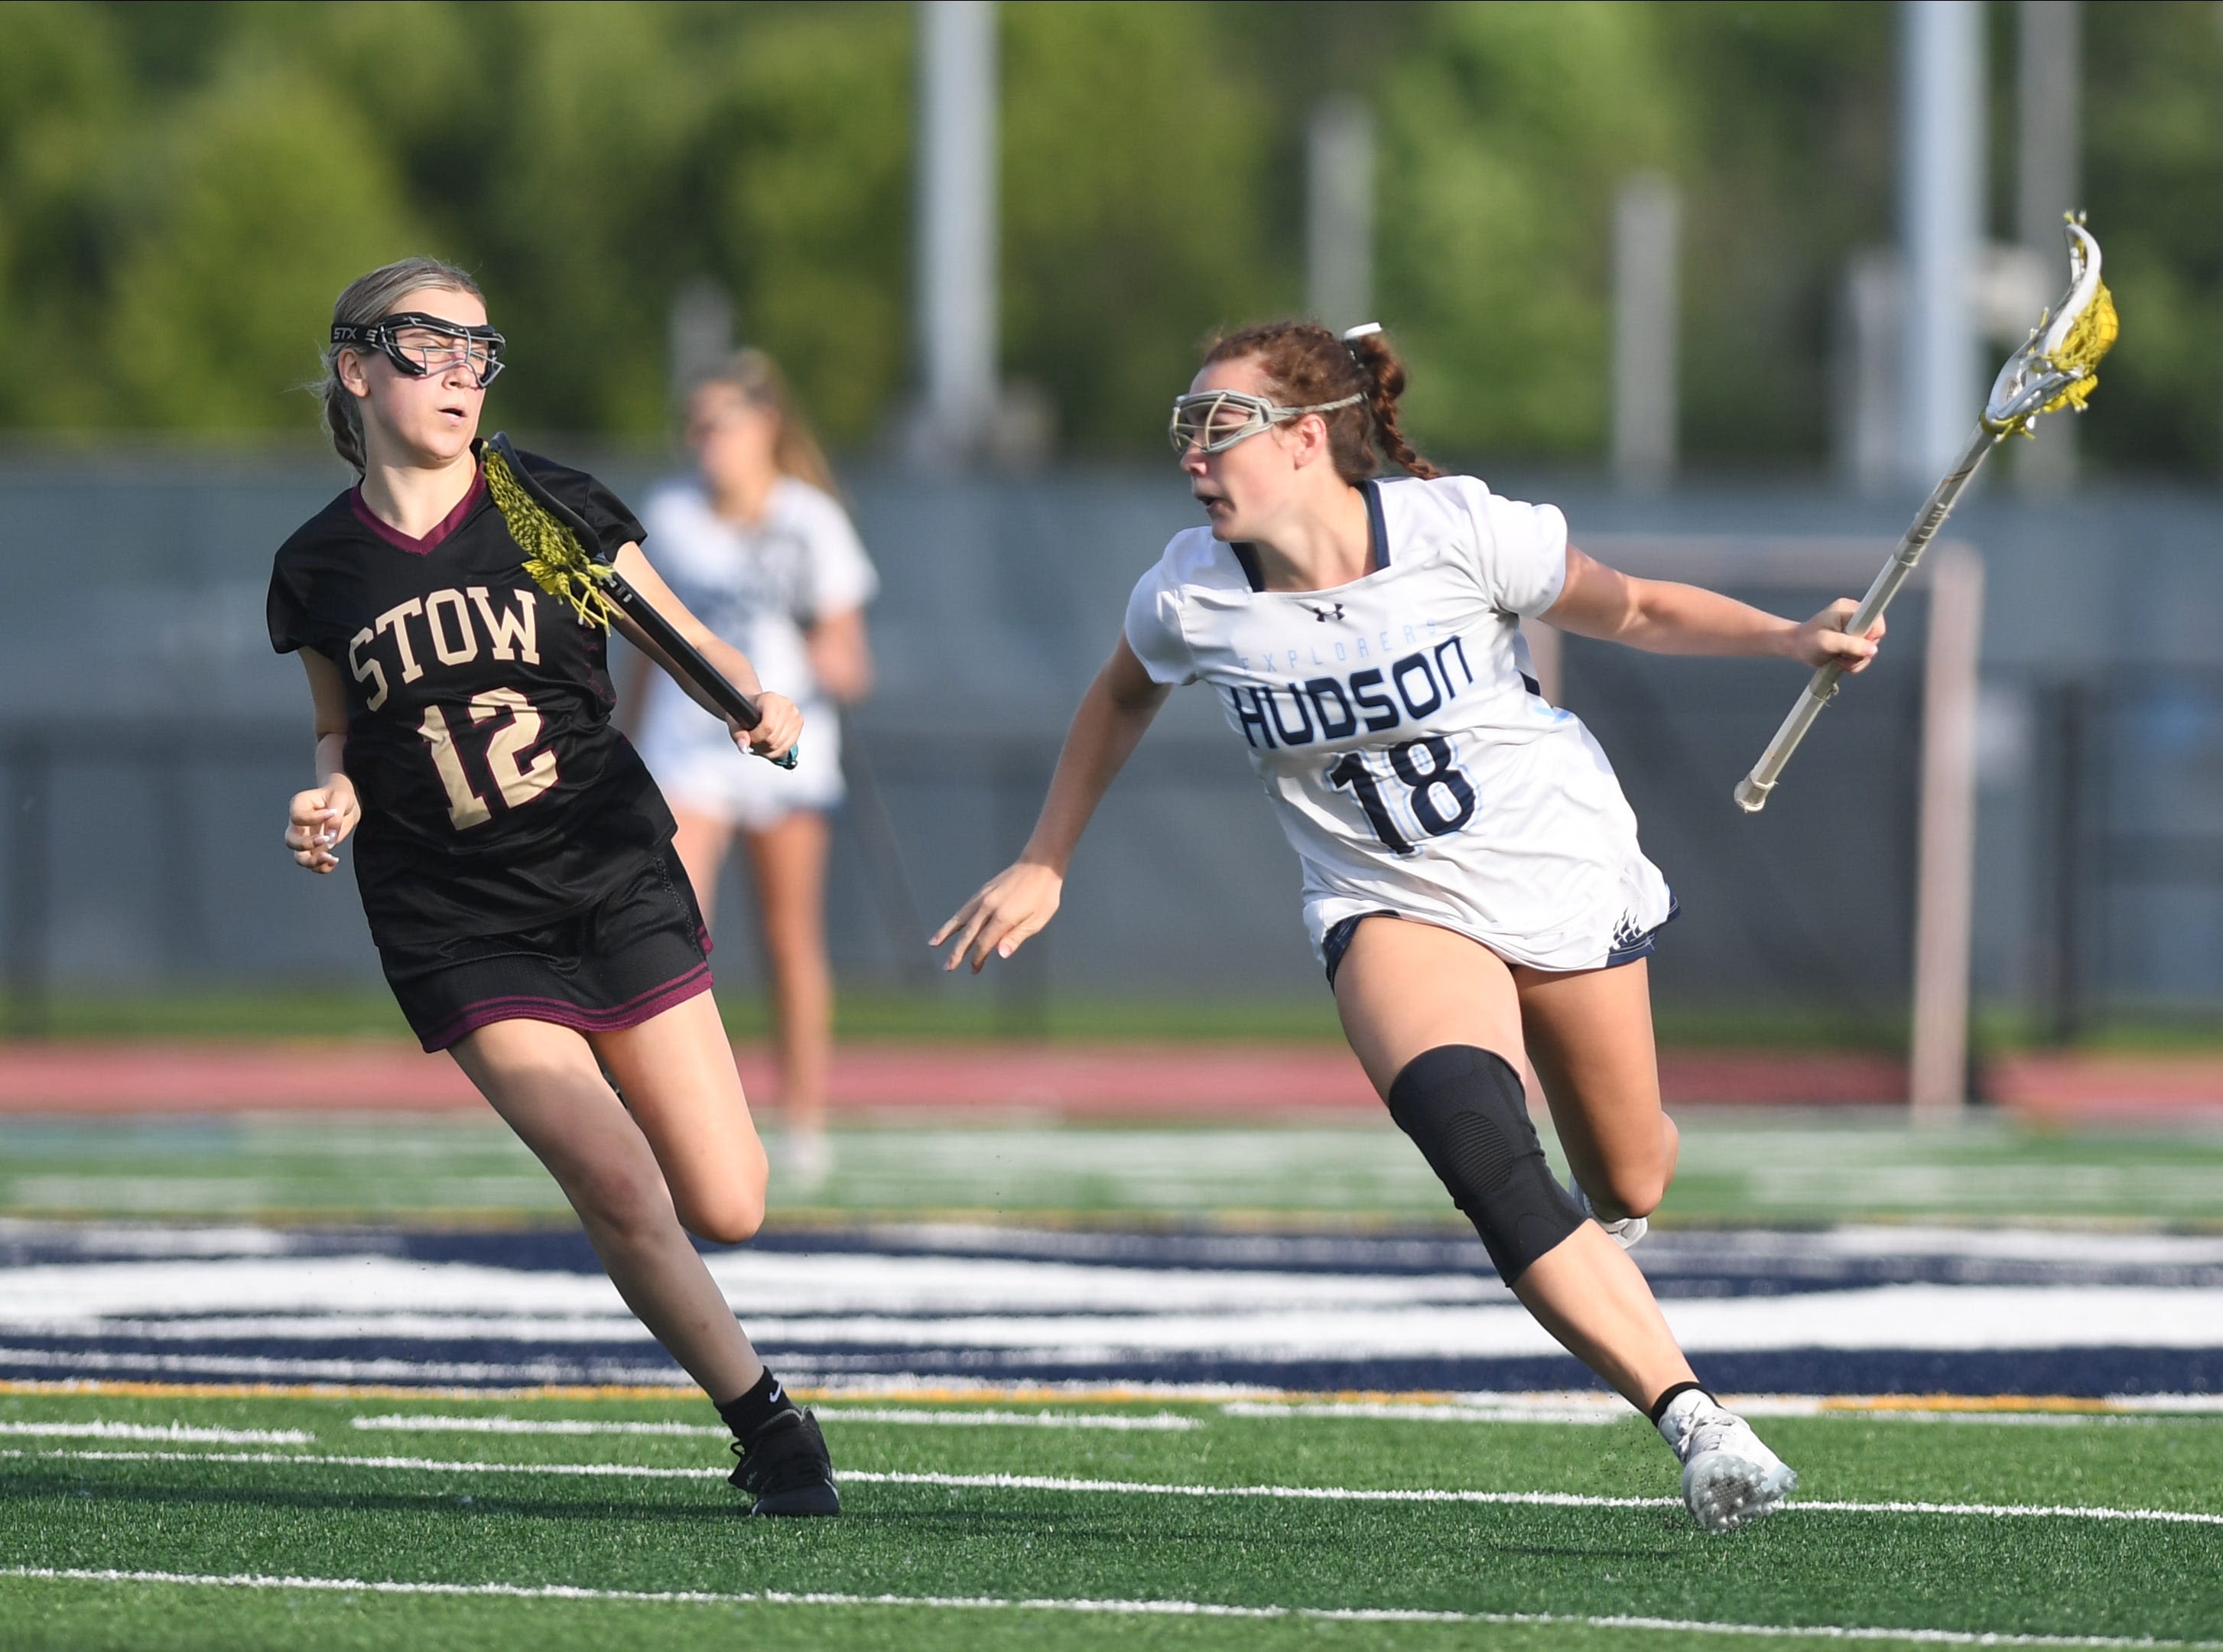 'We came out on fire': Hudson dominates Stow in OHSAA girls lacrosse regional semifinal